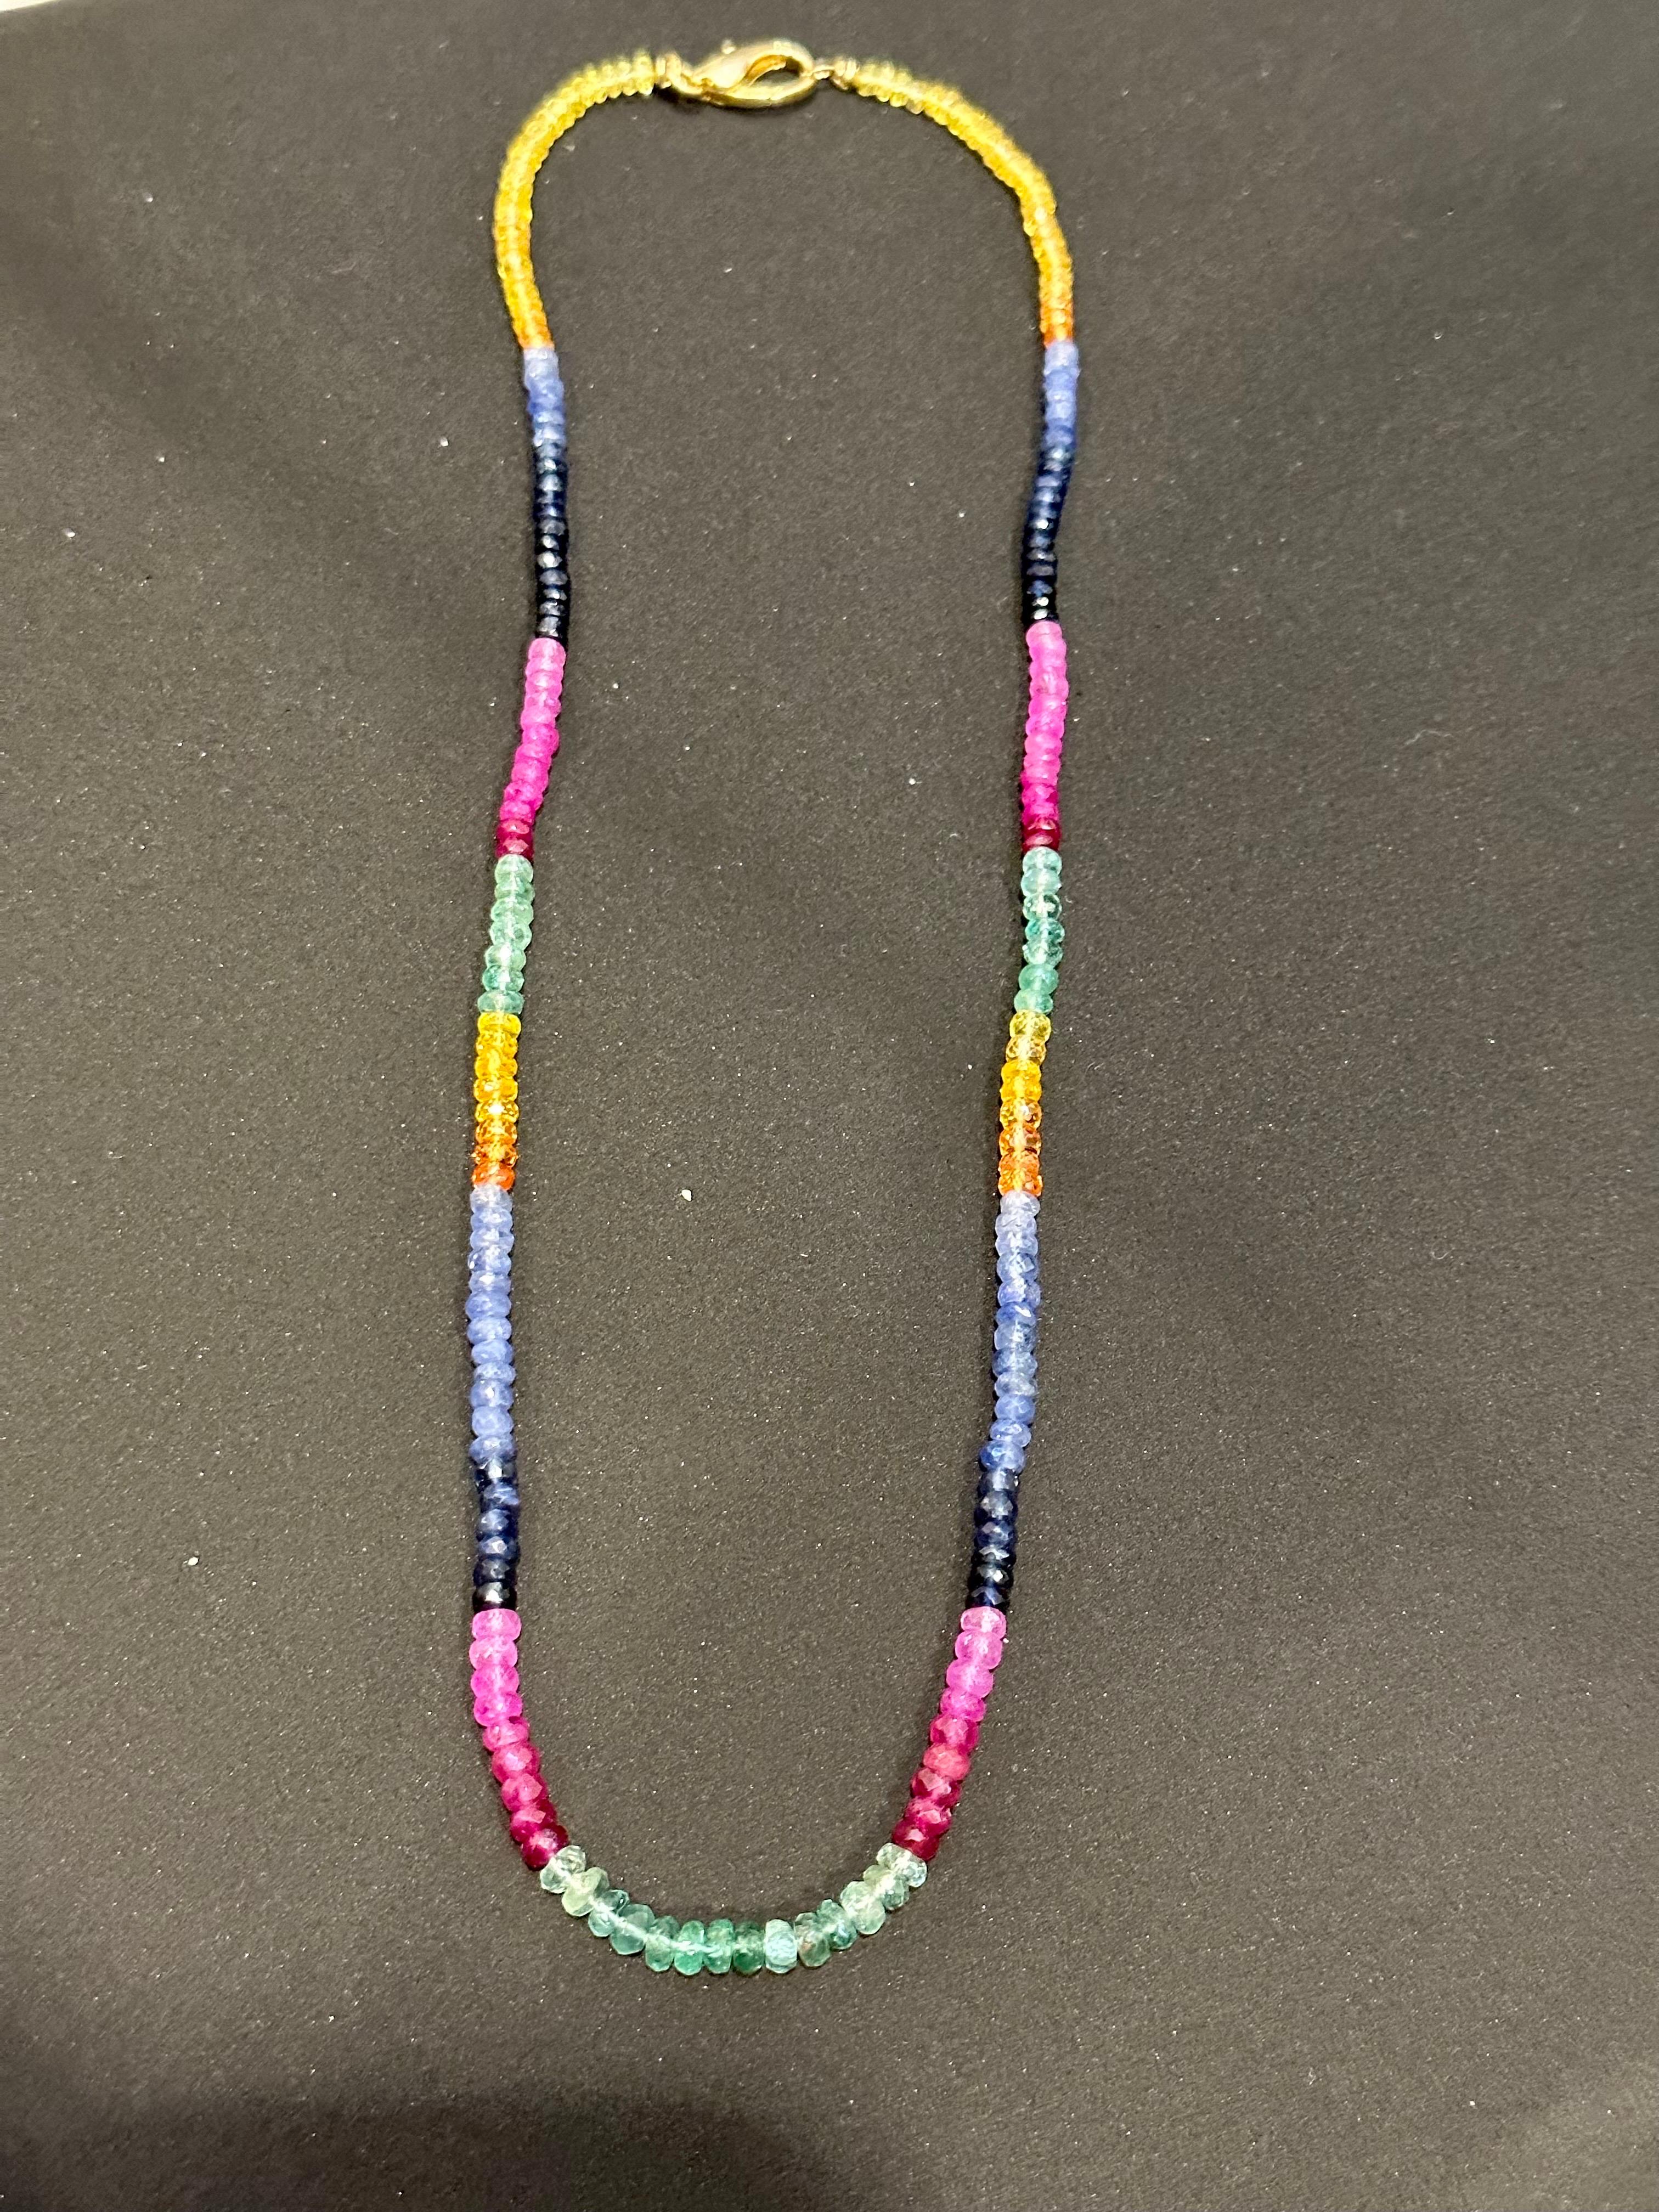 Approximately 70 Ct Single  Layer Faceted  Natural Emerald Ruby & Sapphire Bead Necklace  14 Karat  yellow Gold  Clasp
This spectacular Necklace   consisting of approximately 70 Ct   of  Fine and natural beads of all precious stones ,,, Emerald ,